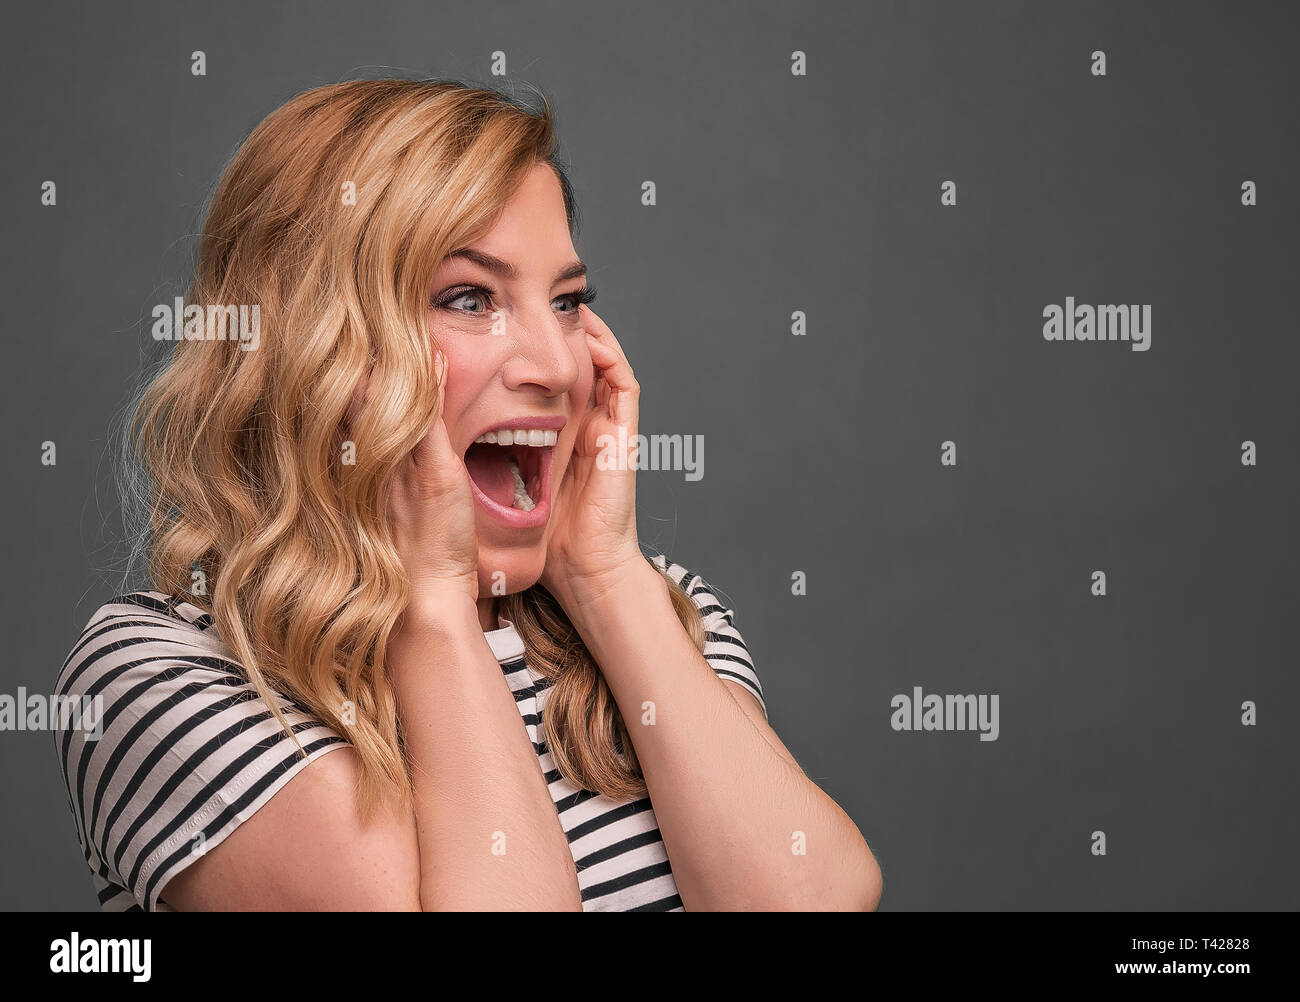 Emotional blonde screams. Frightened woman screaming straining standing on a gray background. Stock Photo